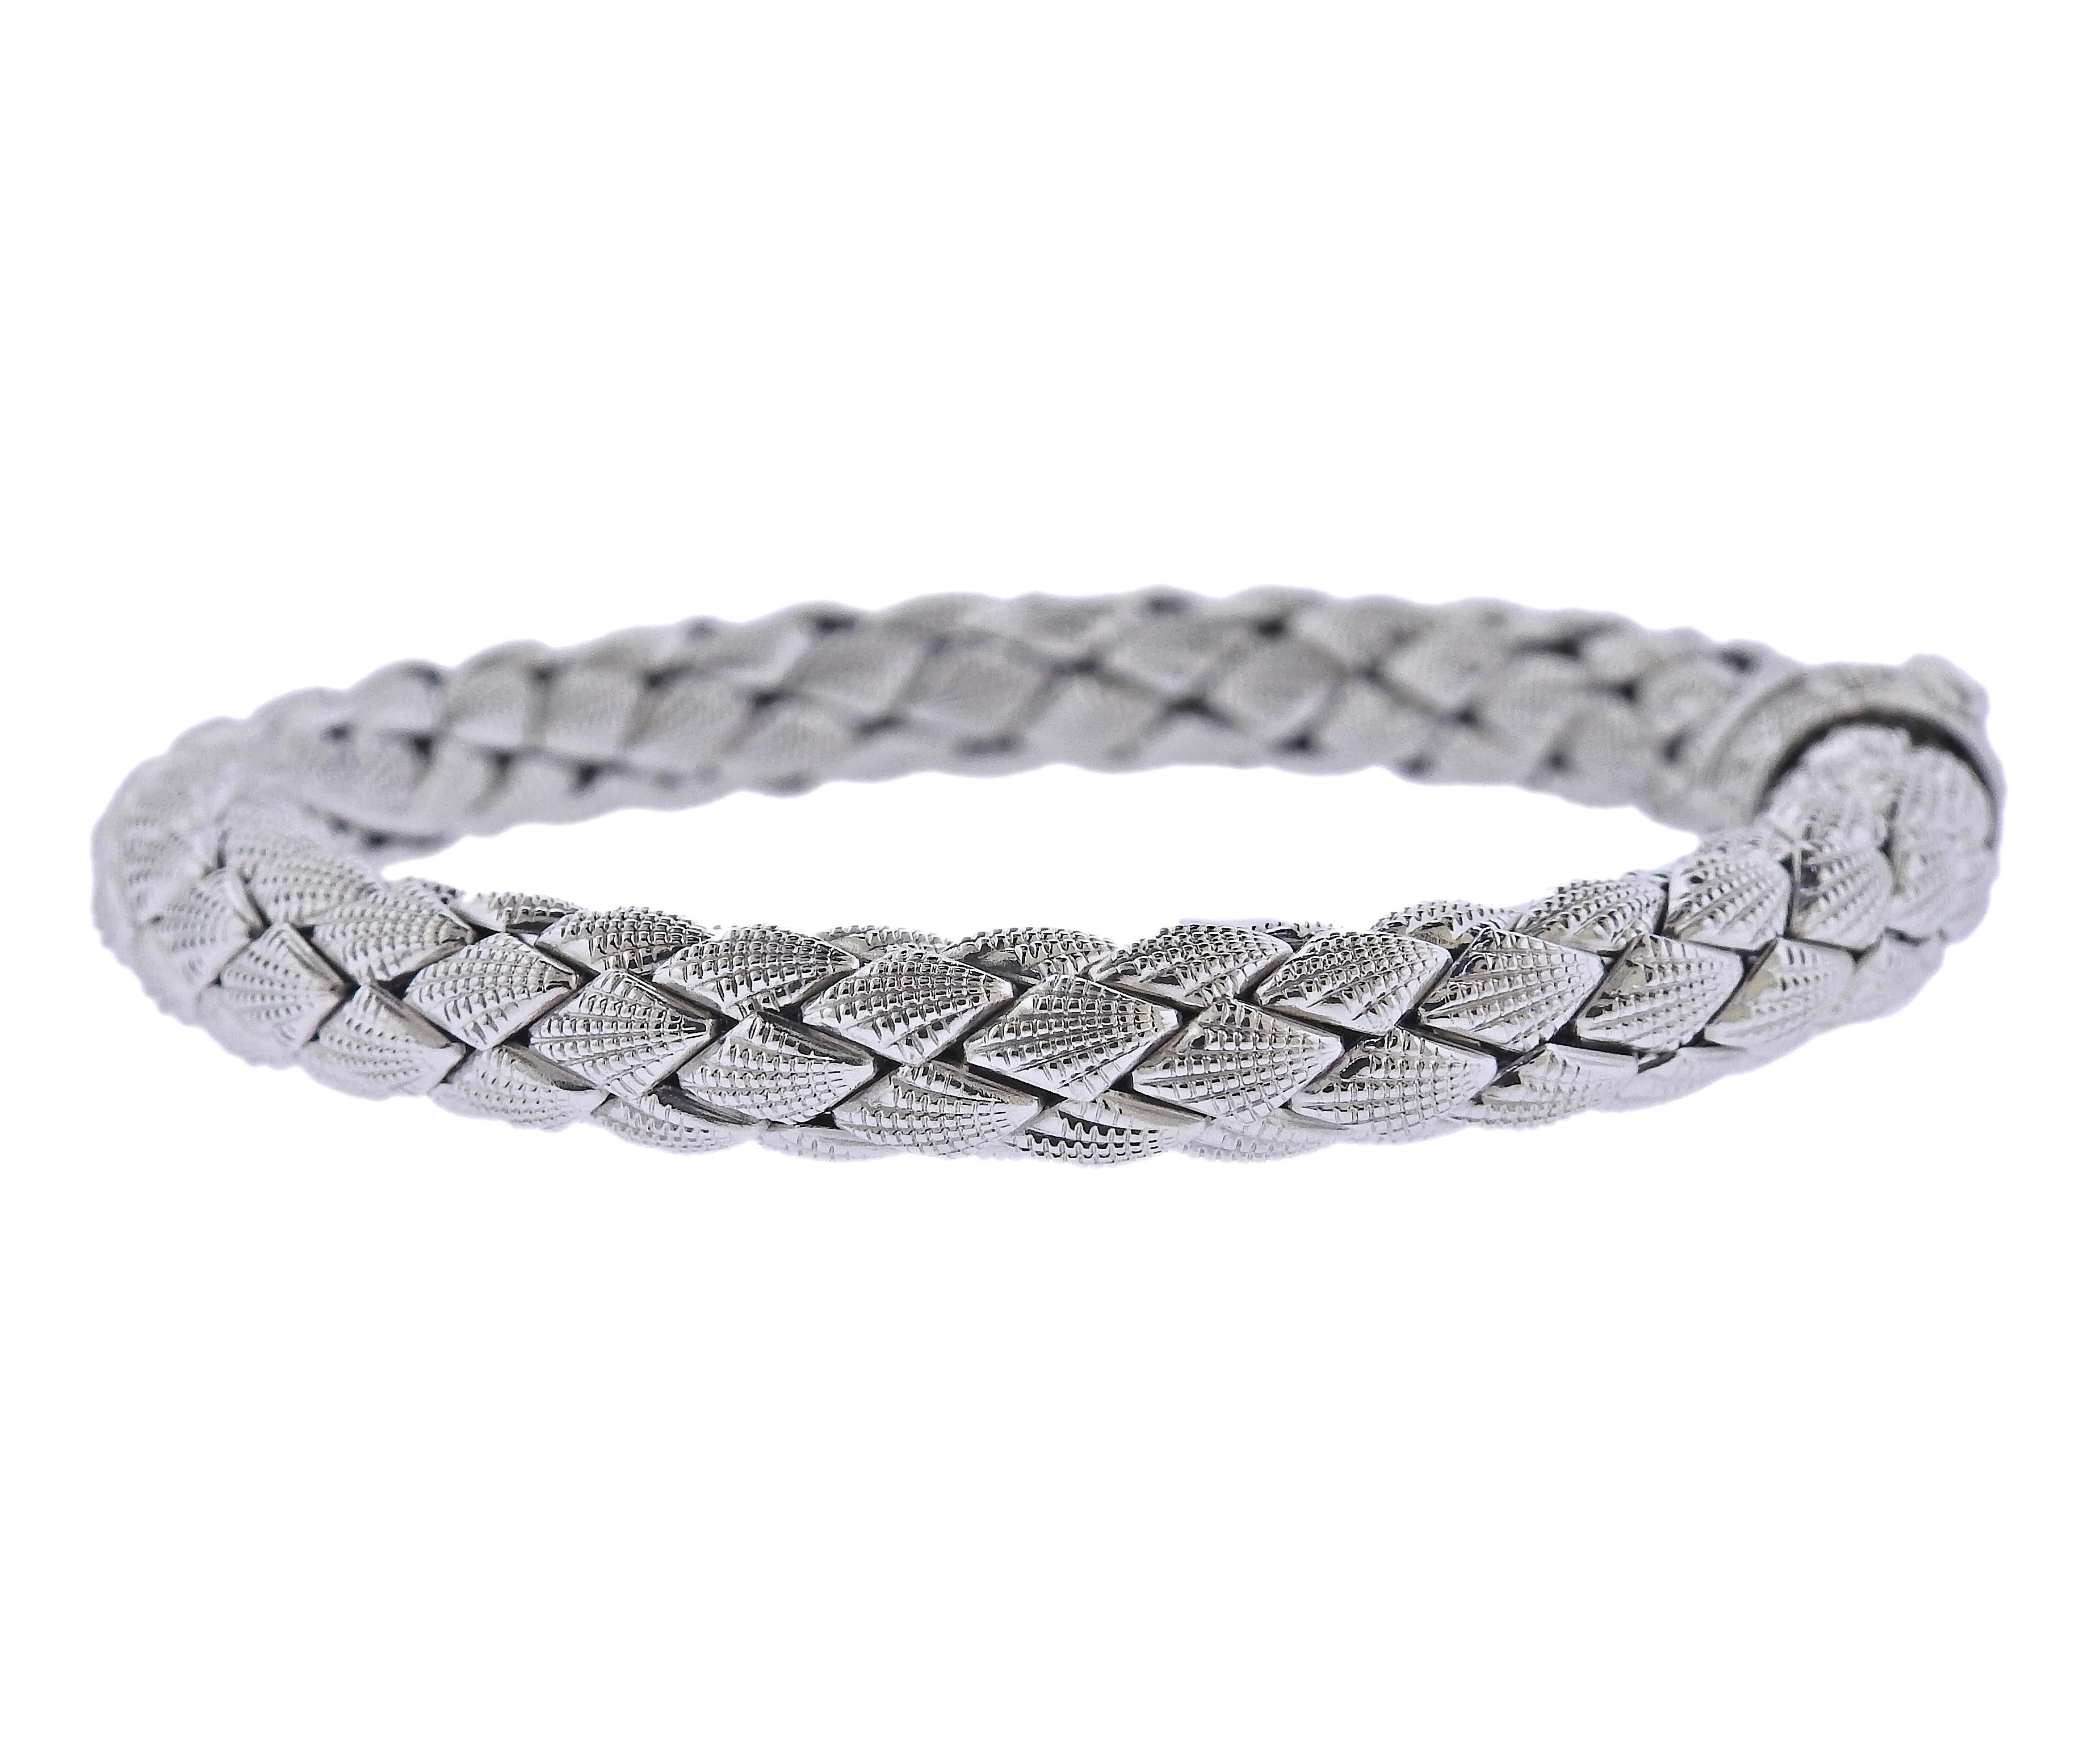 18k white gold braided bracelet by Chimento, with 0.01ct H/VS diamond on the clasp. Bracelet is 8